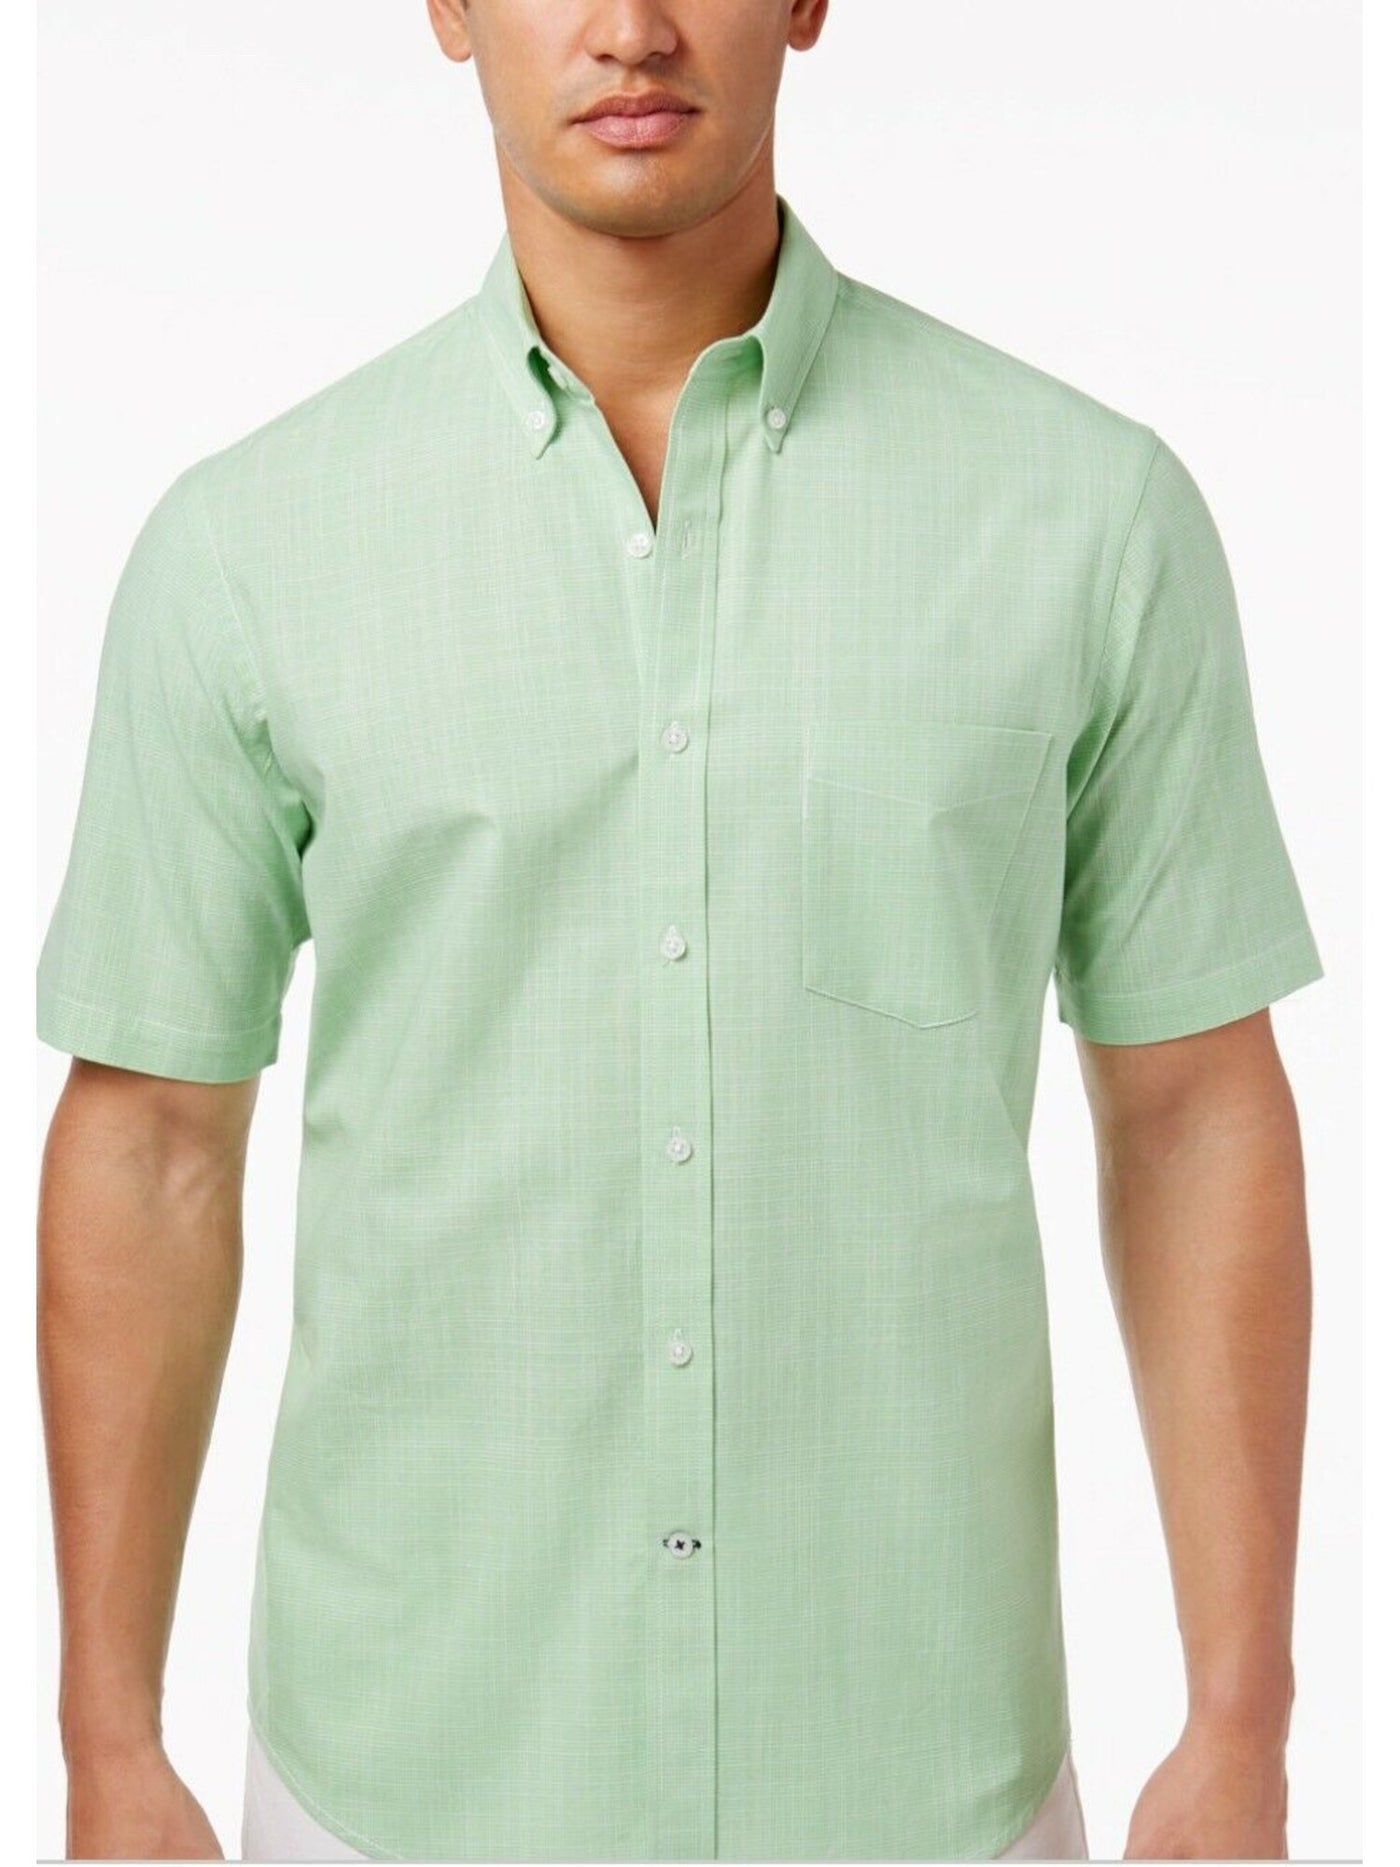 CLUBROOM Mens Green Collared Classic Fit Stretch Dress Shirt S